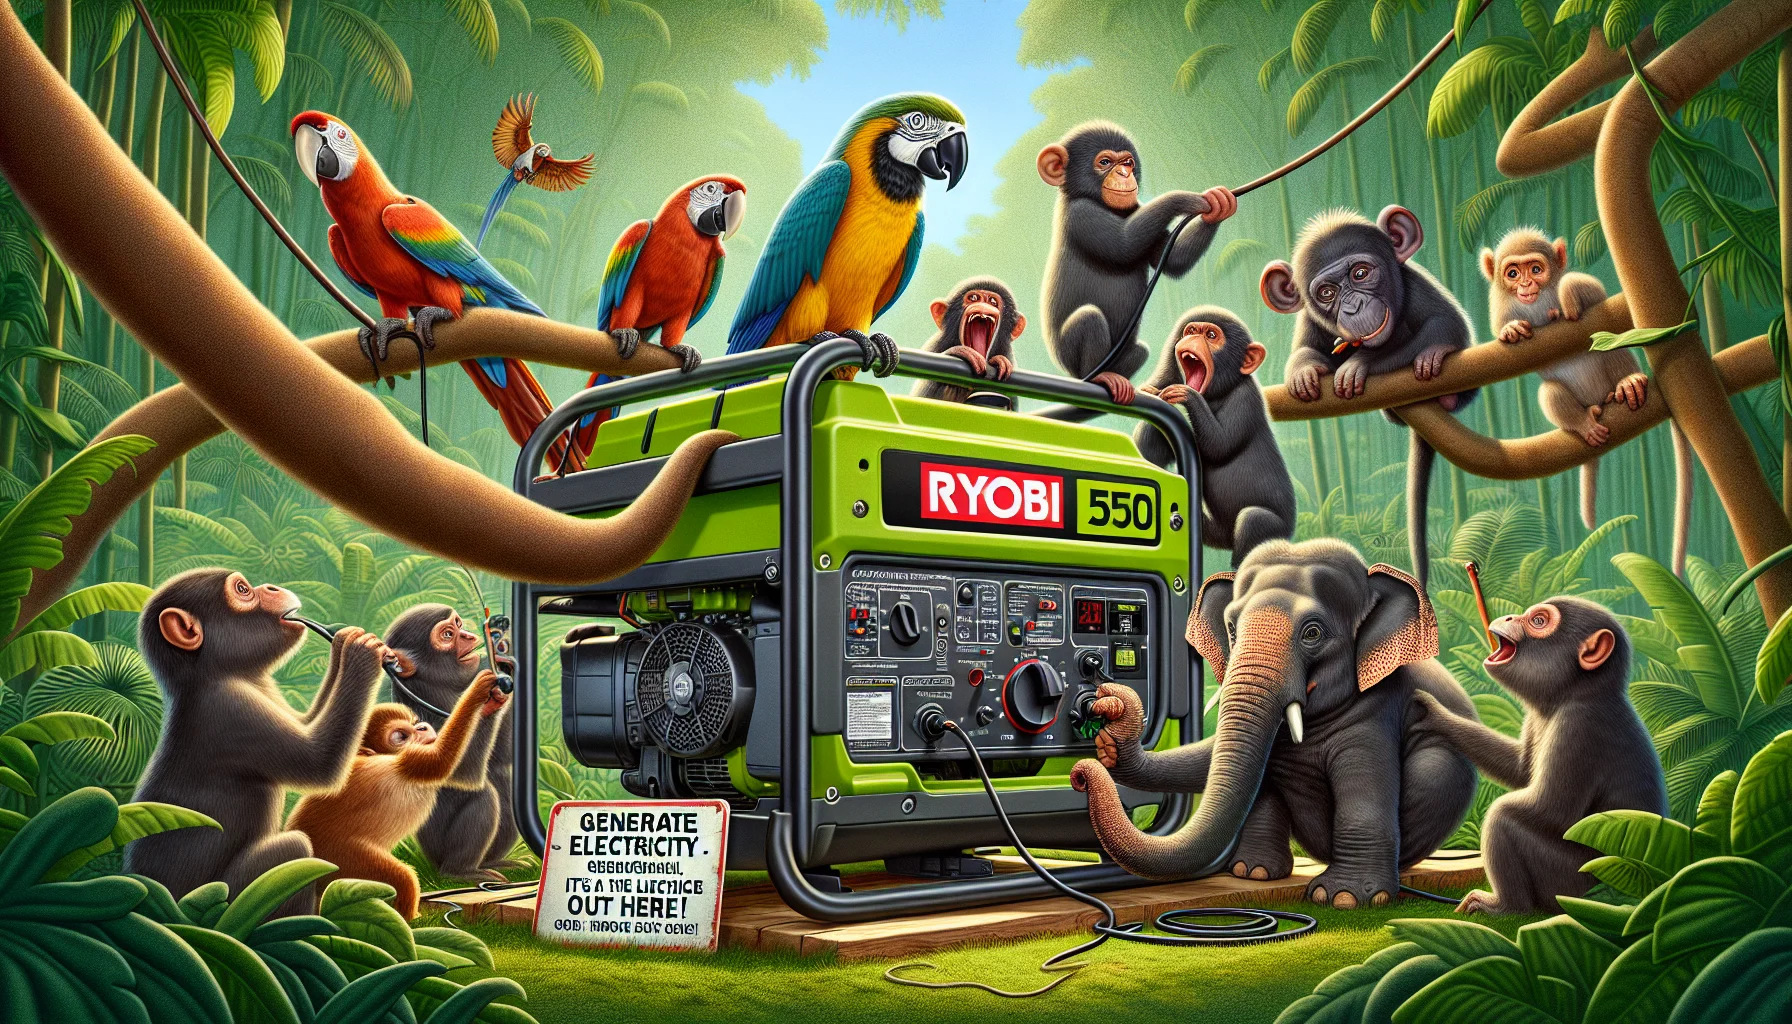 Create an image of a Ryobi 5500 Generator humorously being operated by a group of enthusiastic animals like monkeys, elephants and parrots in a lush, green forest. The animals seem to be having a blast, operating the machine with teamwork. Including details like the parrots perched on the generator, monkeys fiddling with the dials and an elephant attempting to start the machine with its trunk. There's a sign nearby that reads 'Generate electricity - it's a jungle out here!' The image should be colourful, lively and inspire a sense of fun bringing electricity to life in unusual circumstances.